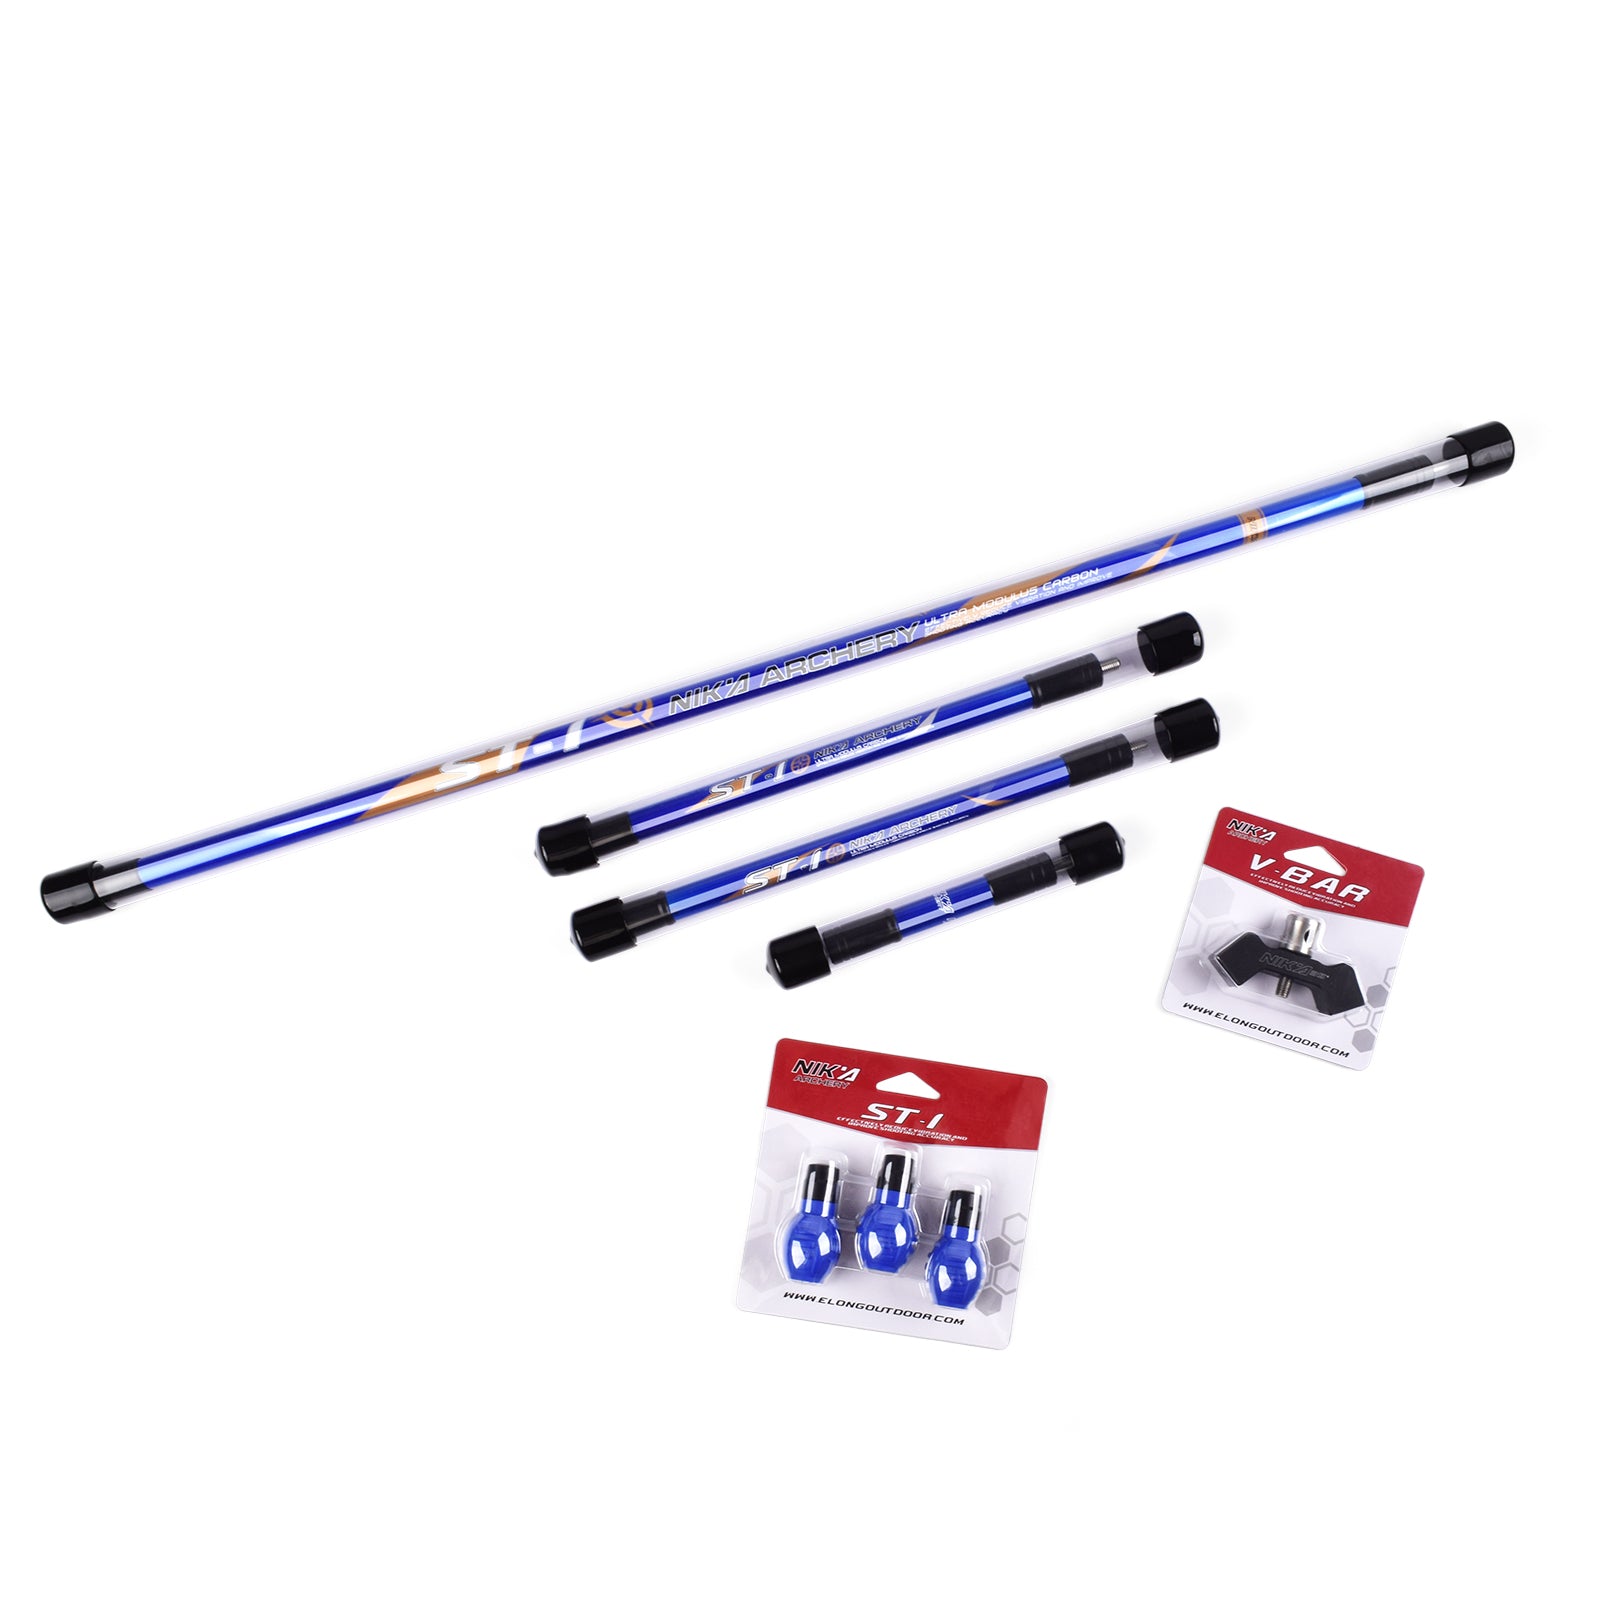 ST-1 Carbon Stabilizer Set Archery Bow Accessories For Shooting